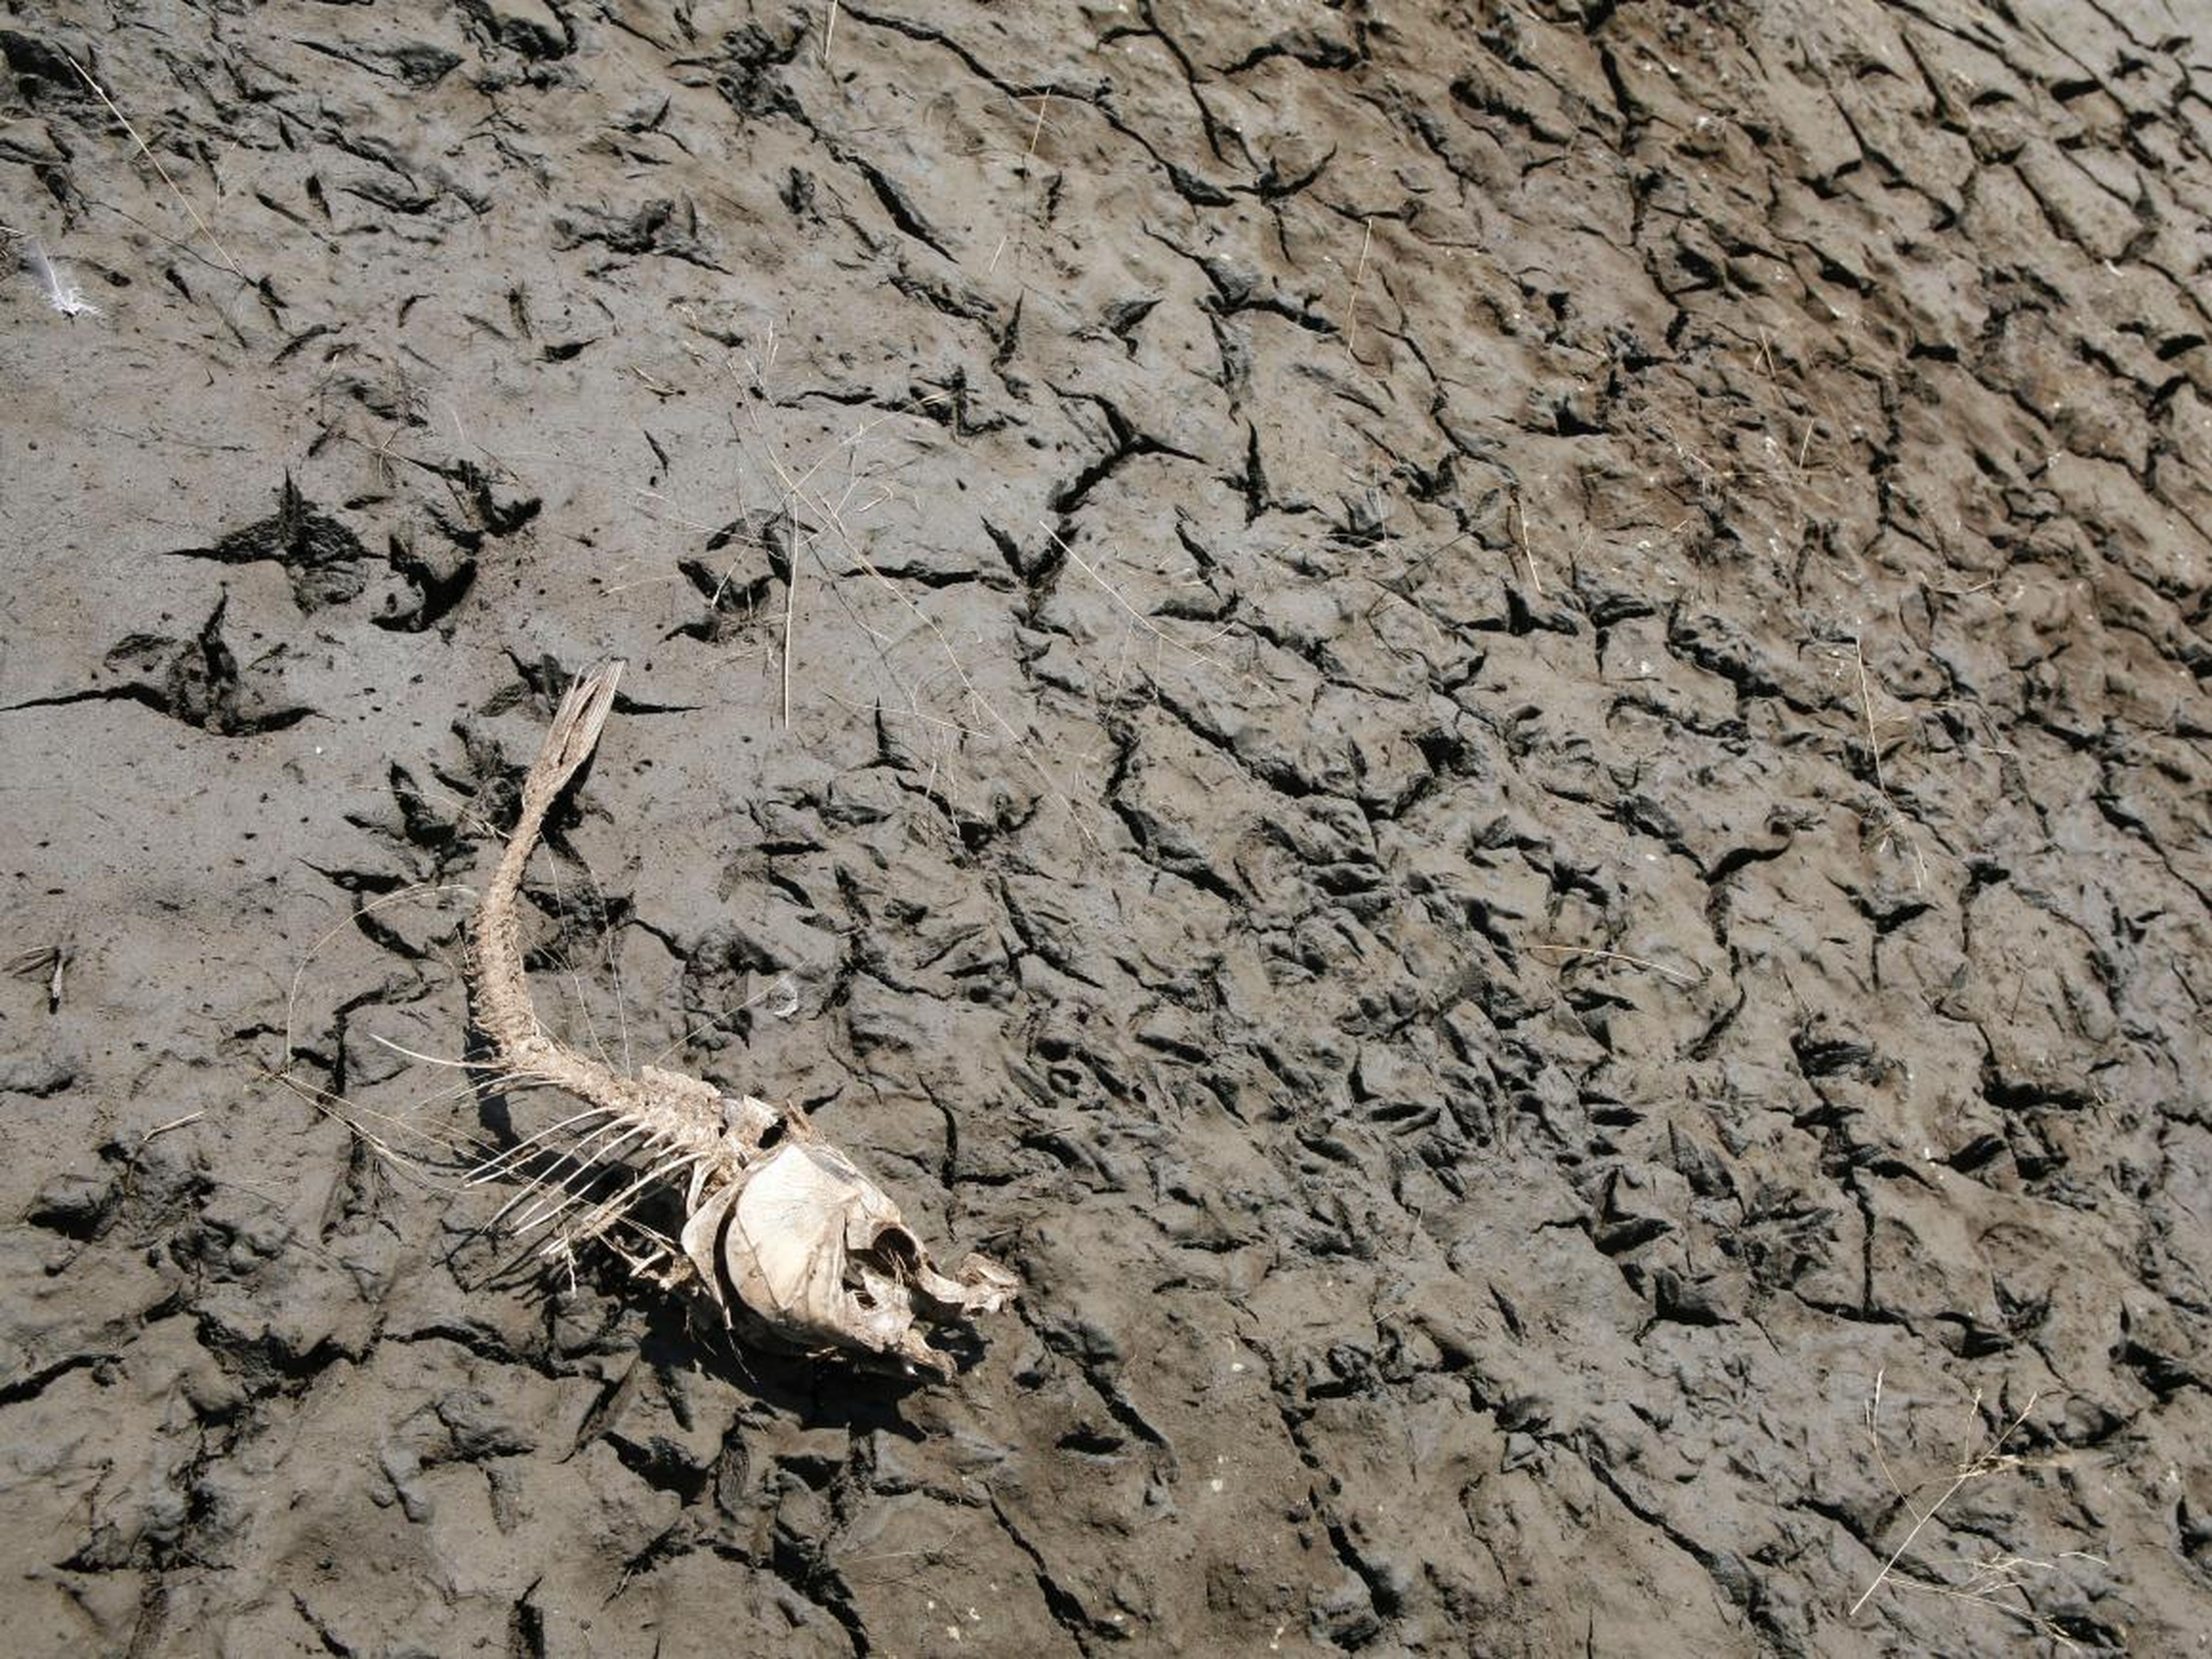 A skeleton of a fish lies forgotten on the dry bed of Lake Peñuelas outside Santiago, Chile.